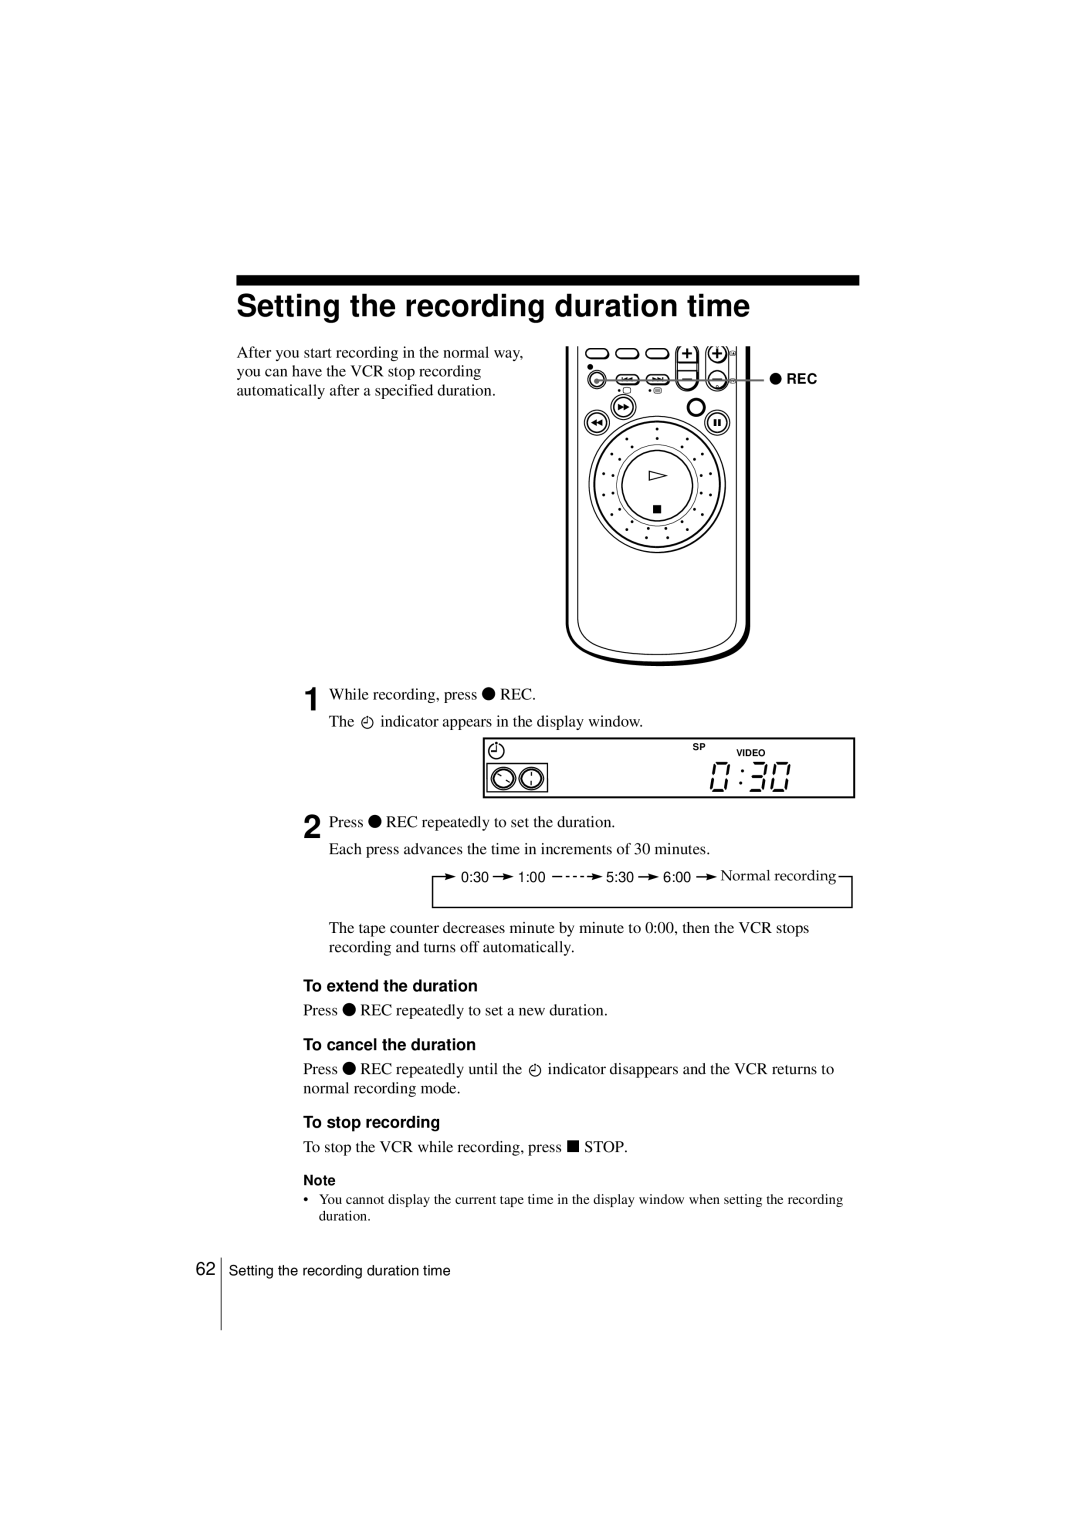 Sony SLV-SF990G Setting the recording duration time, To extend the duration, To cancel the duration, To stop recording 